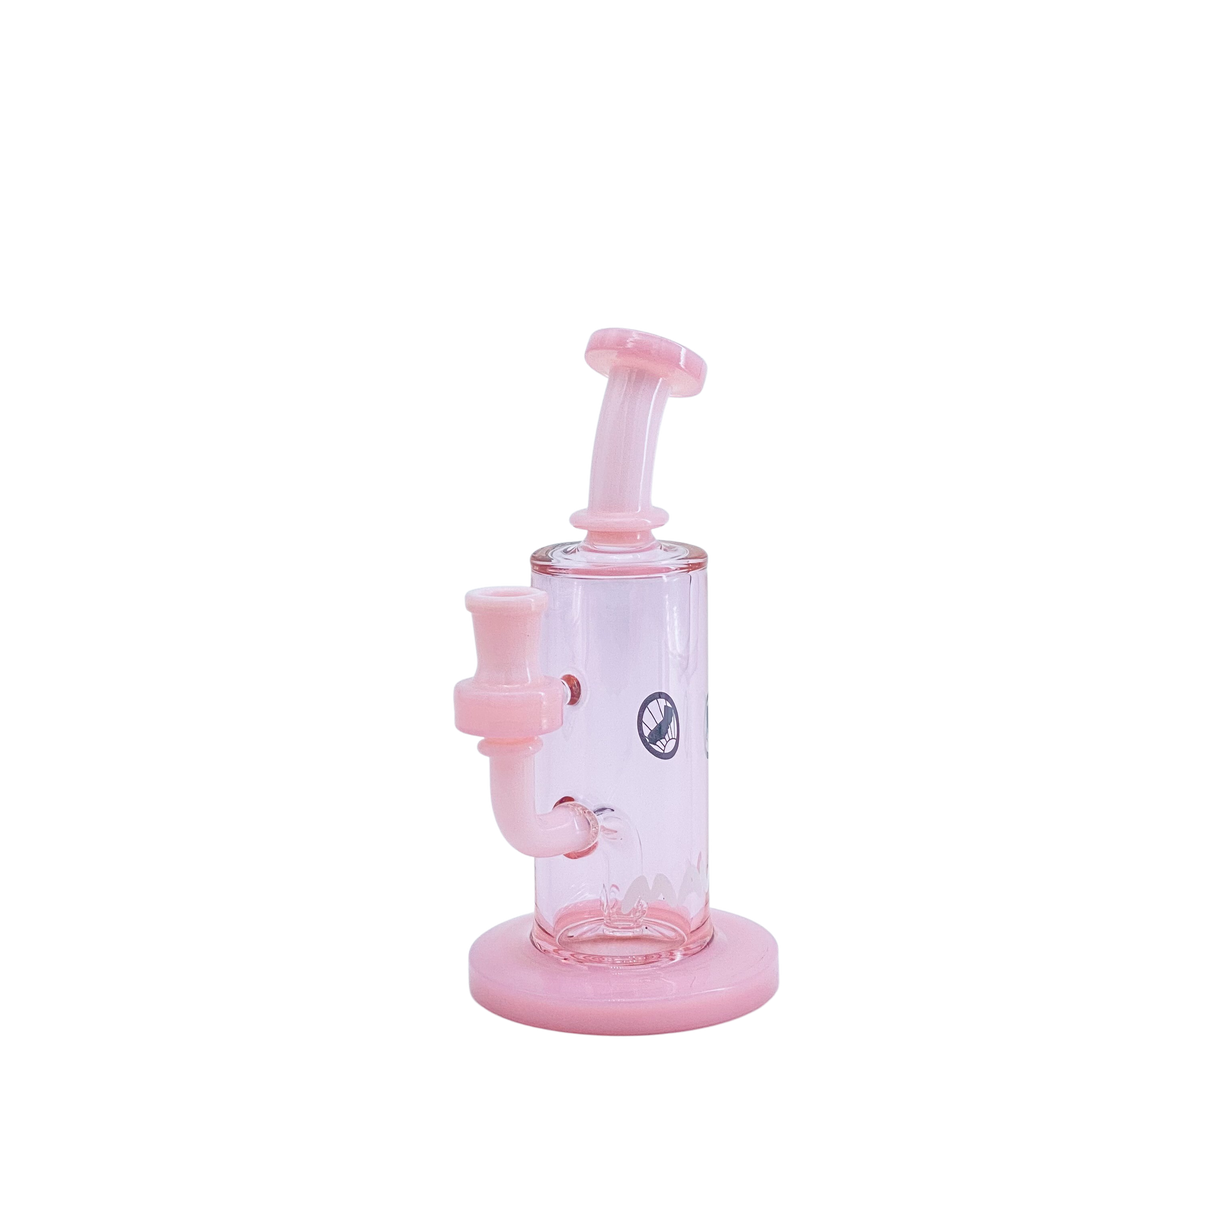 MAV Glass Mini San Diego Bong in Pink with Beaker Design and 14mm Joint - Front View